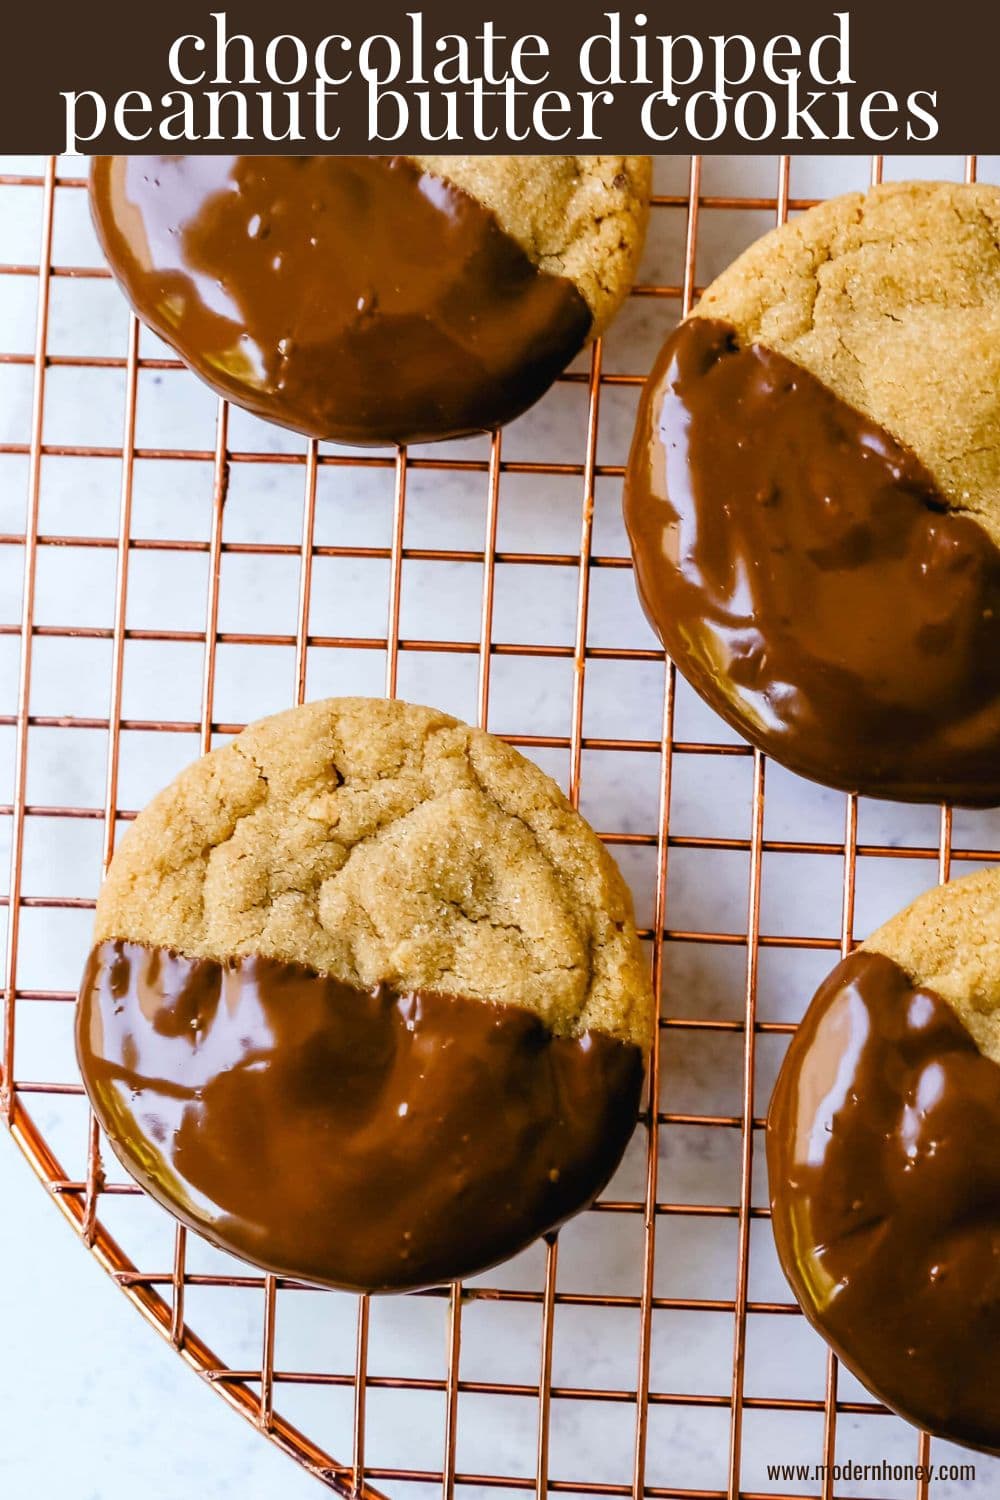 Soft, chewy homemade peanut butter cookies dipped in melted chocolate. This peanut butter and chocolate cookie is rich and decadent and perfect for chocolate peanut butter lovers!